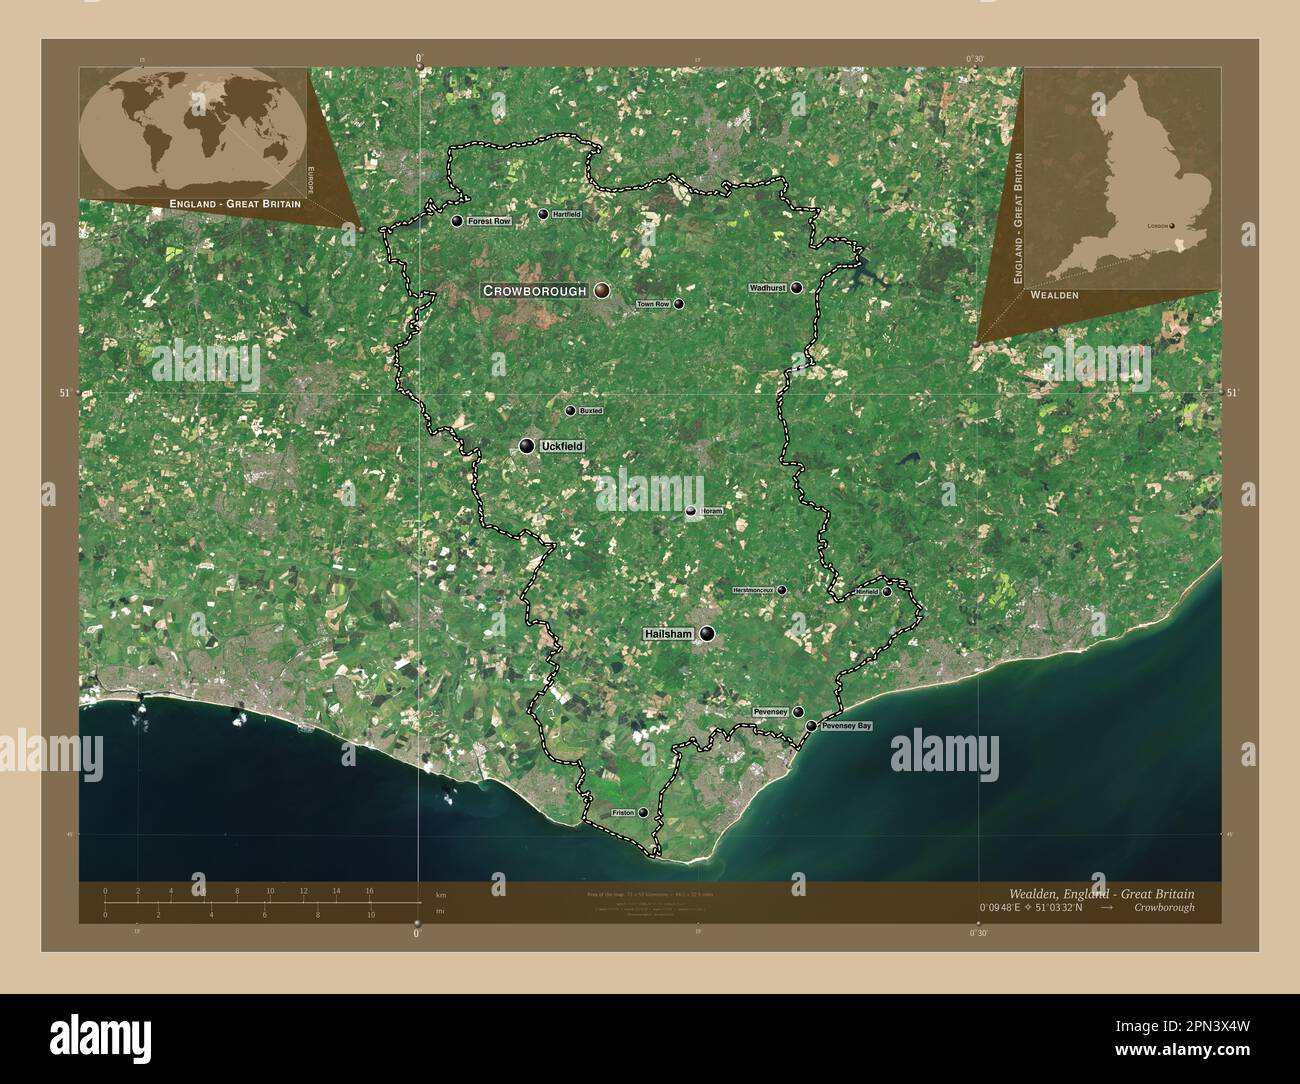 Wealden, non metropolitan district of England - Great Britain. Low resolution satellite map. Locations and names of major cities of the region. Corner Stock Photo